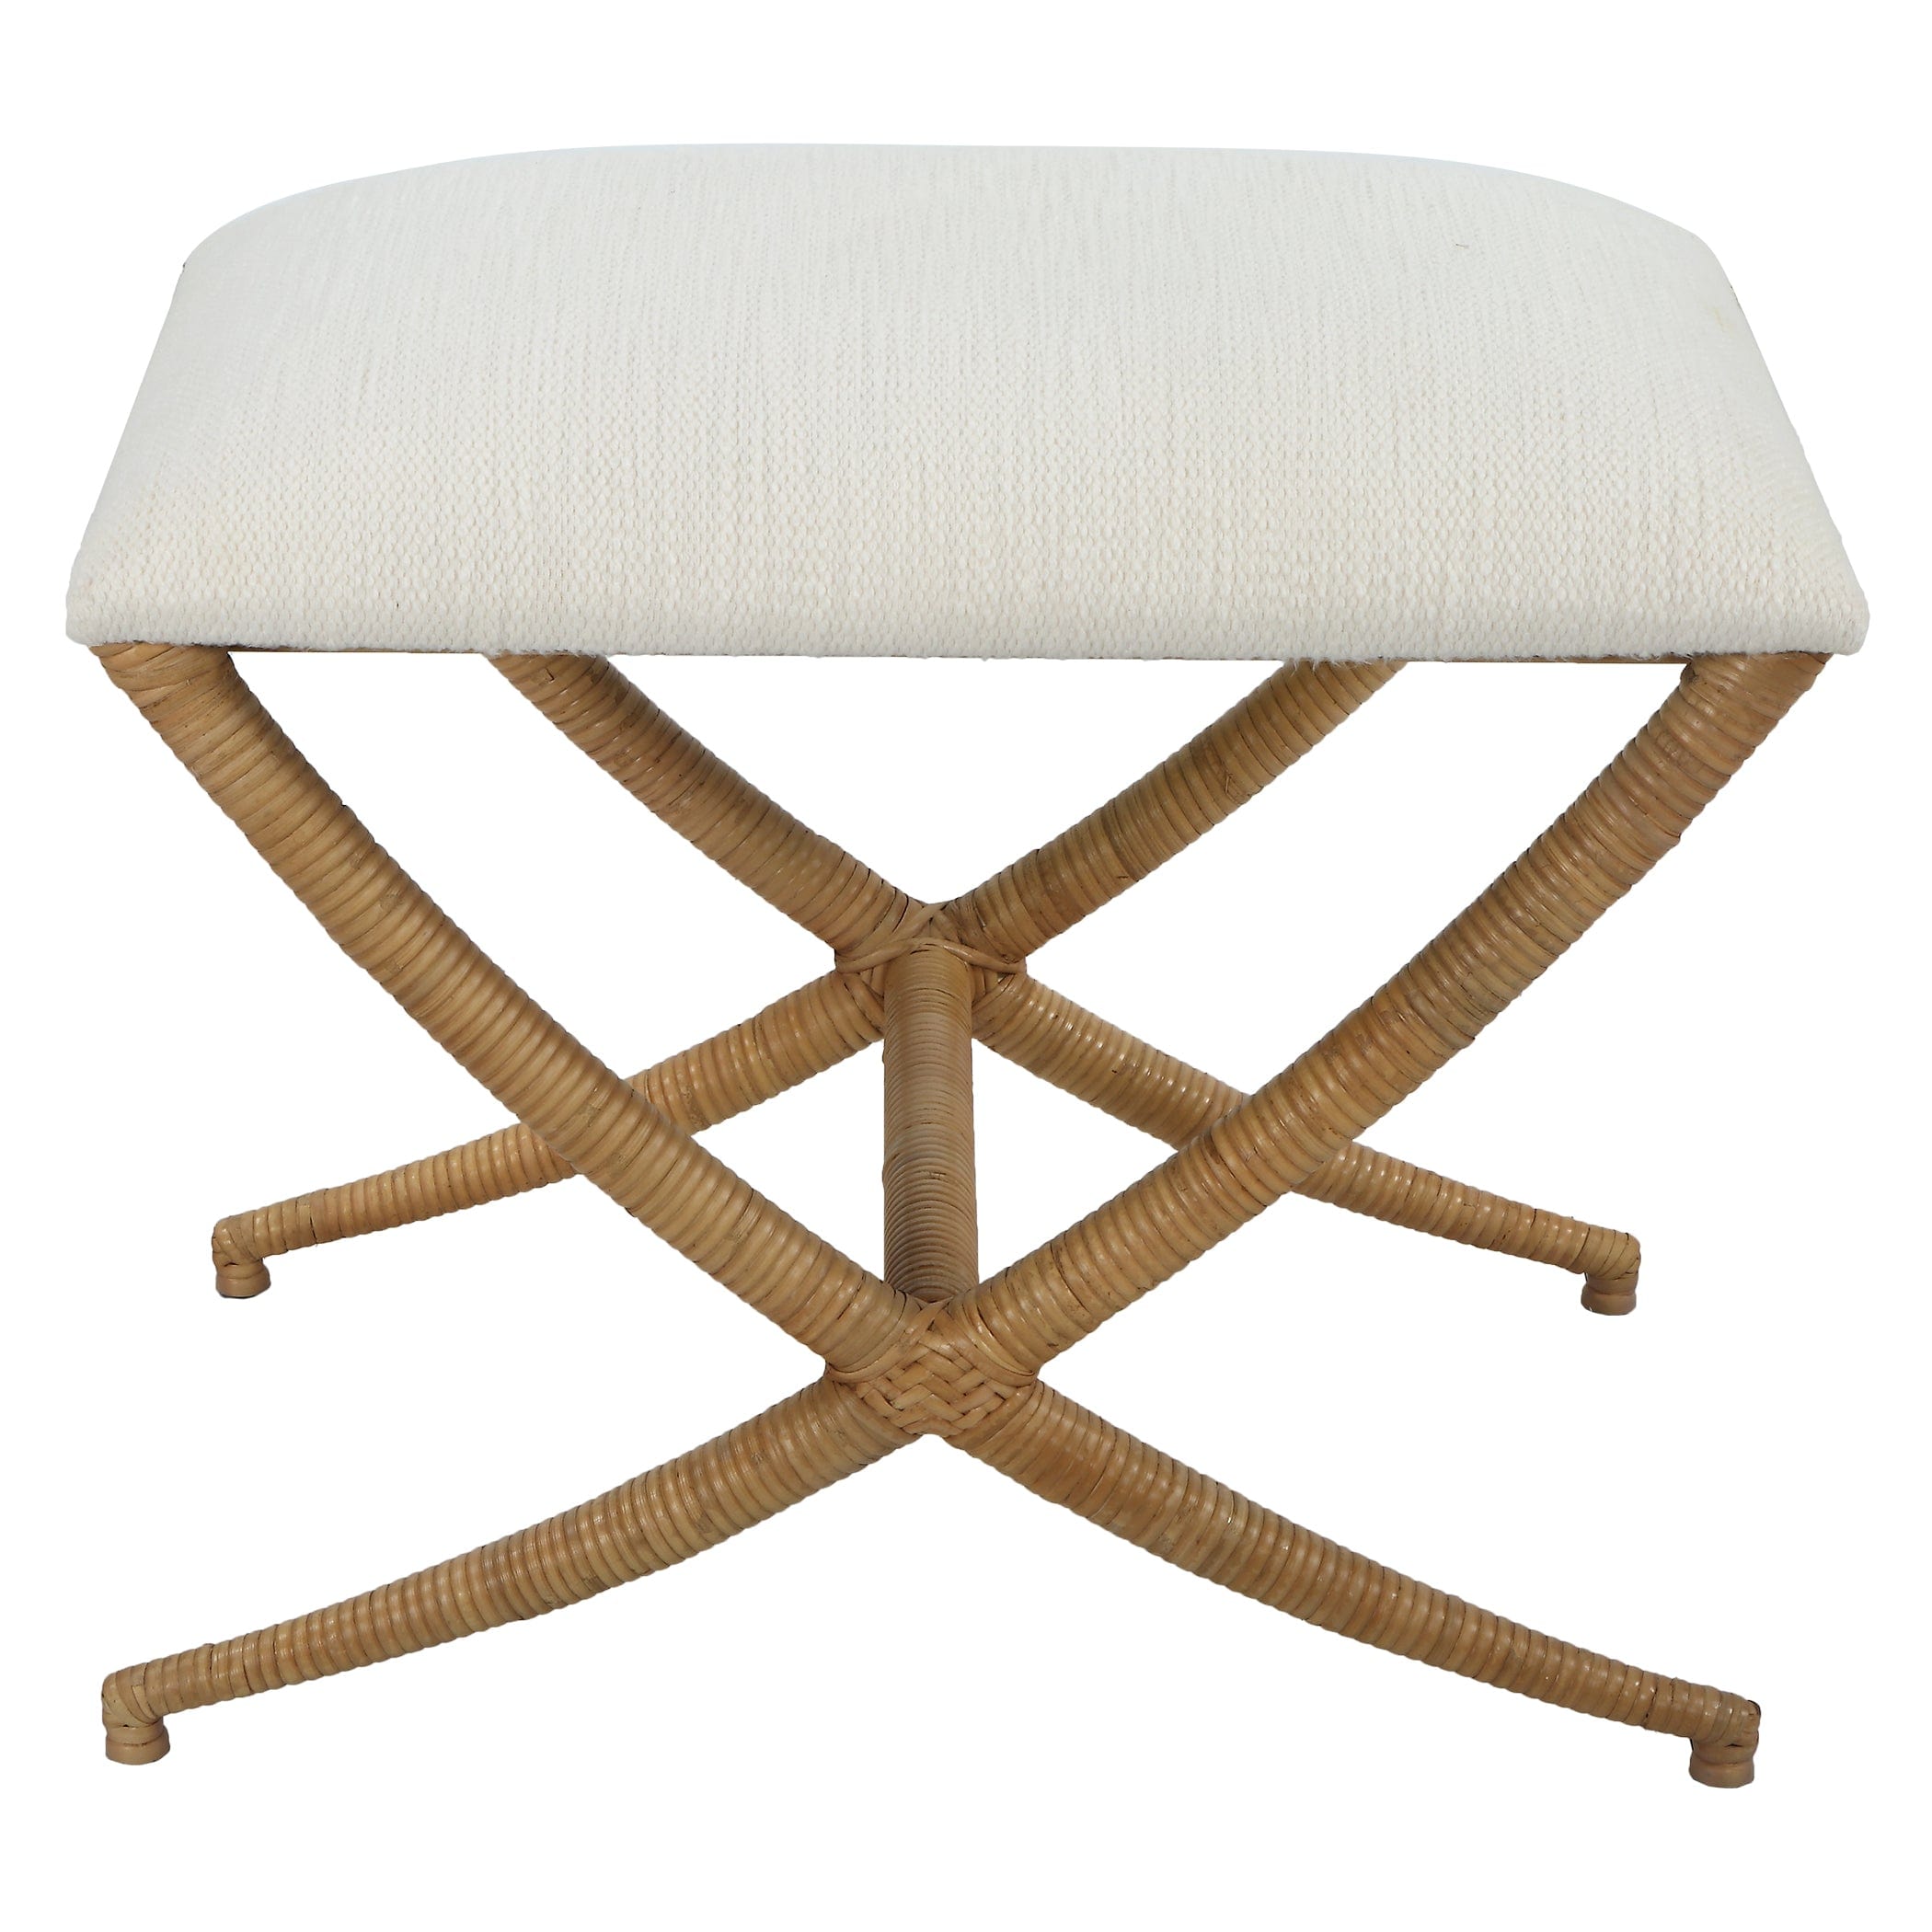 Expedition White Fabric Small Bench Uttermost